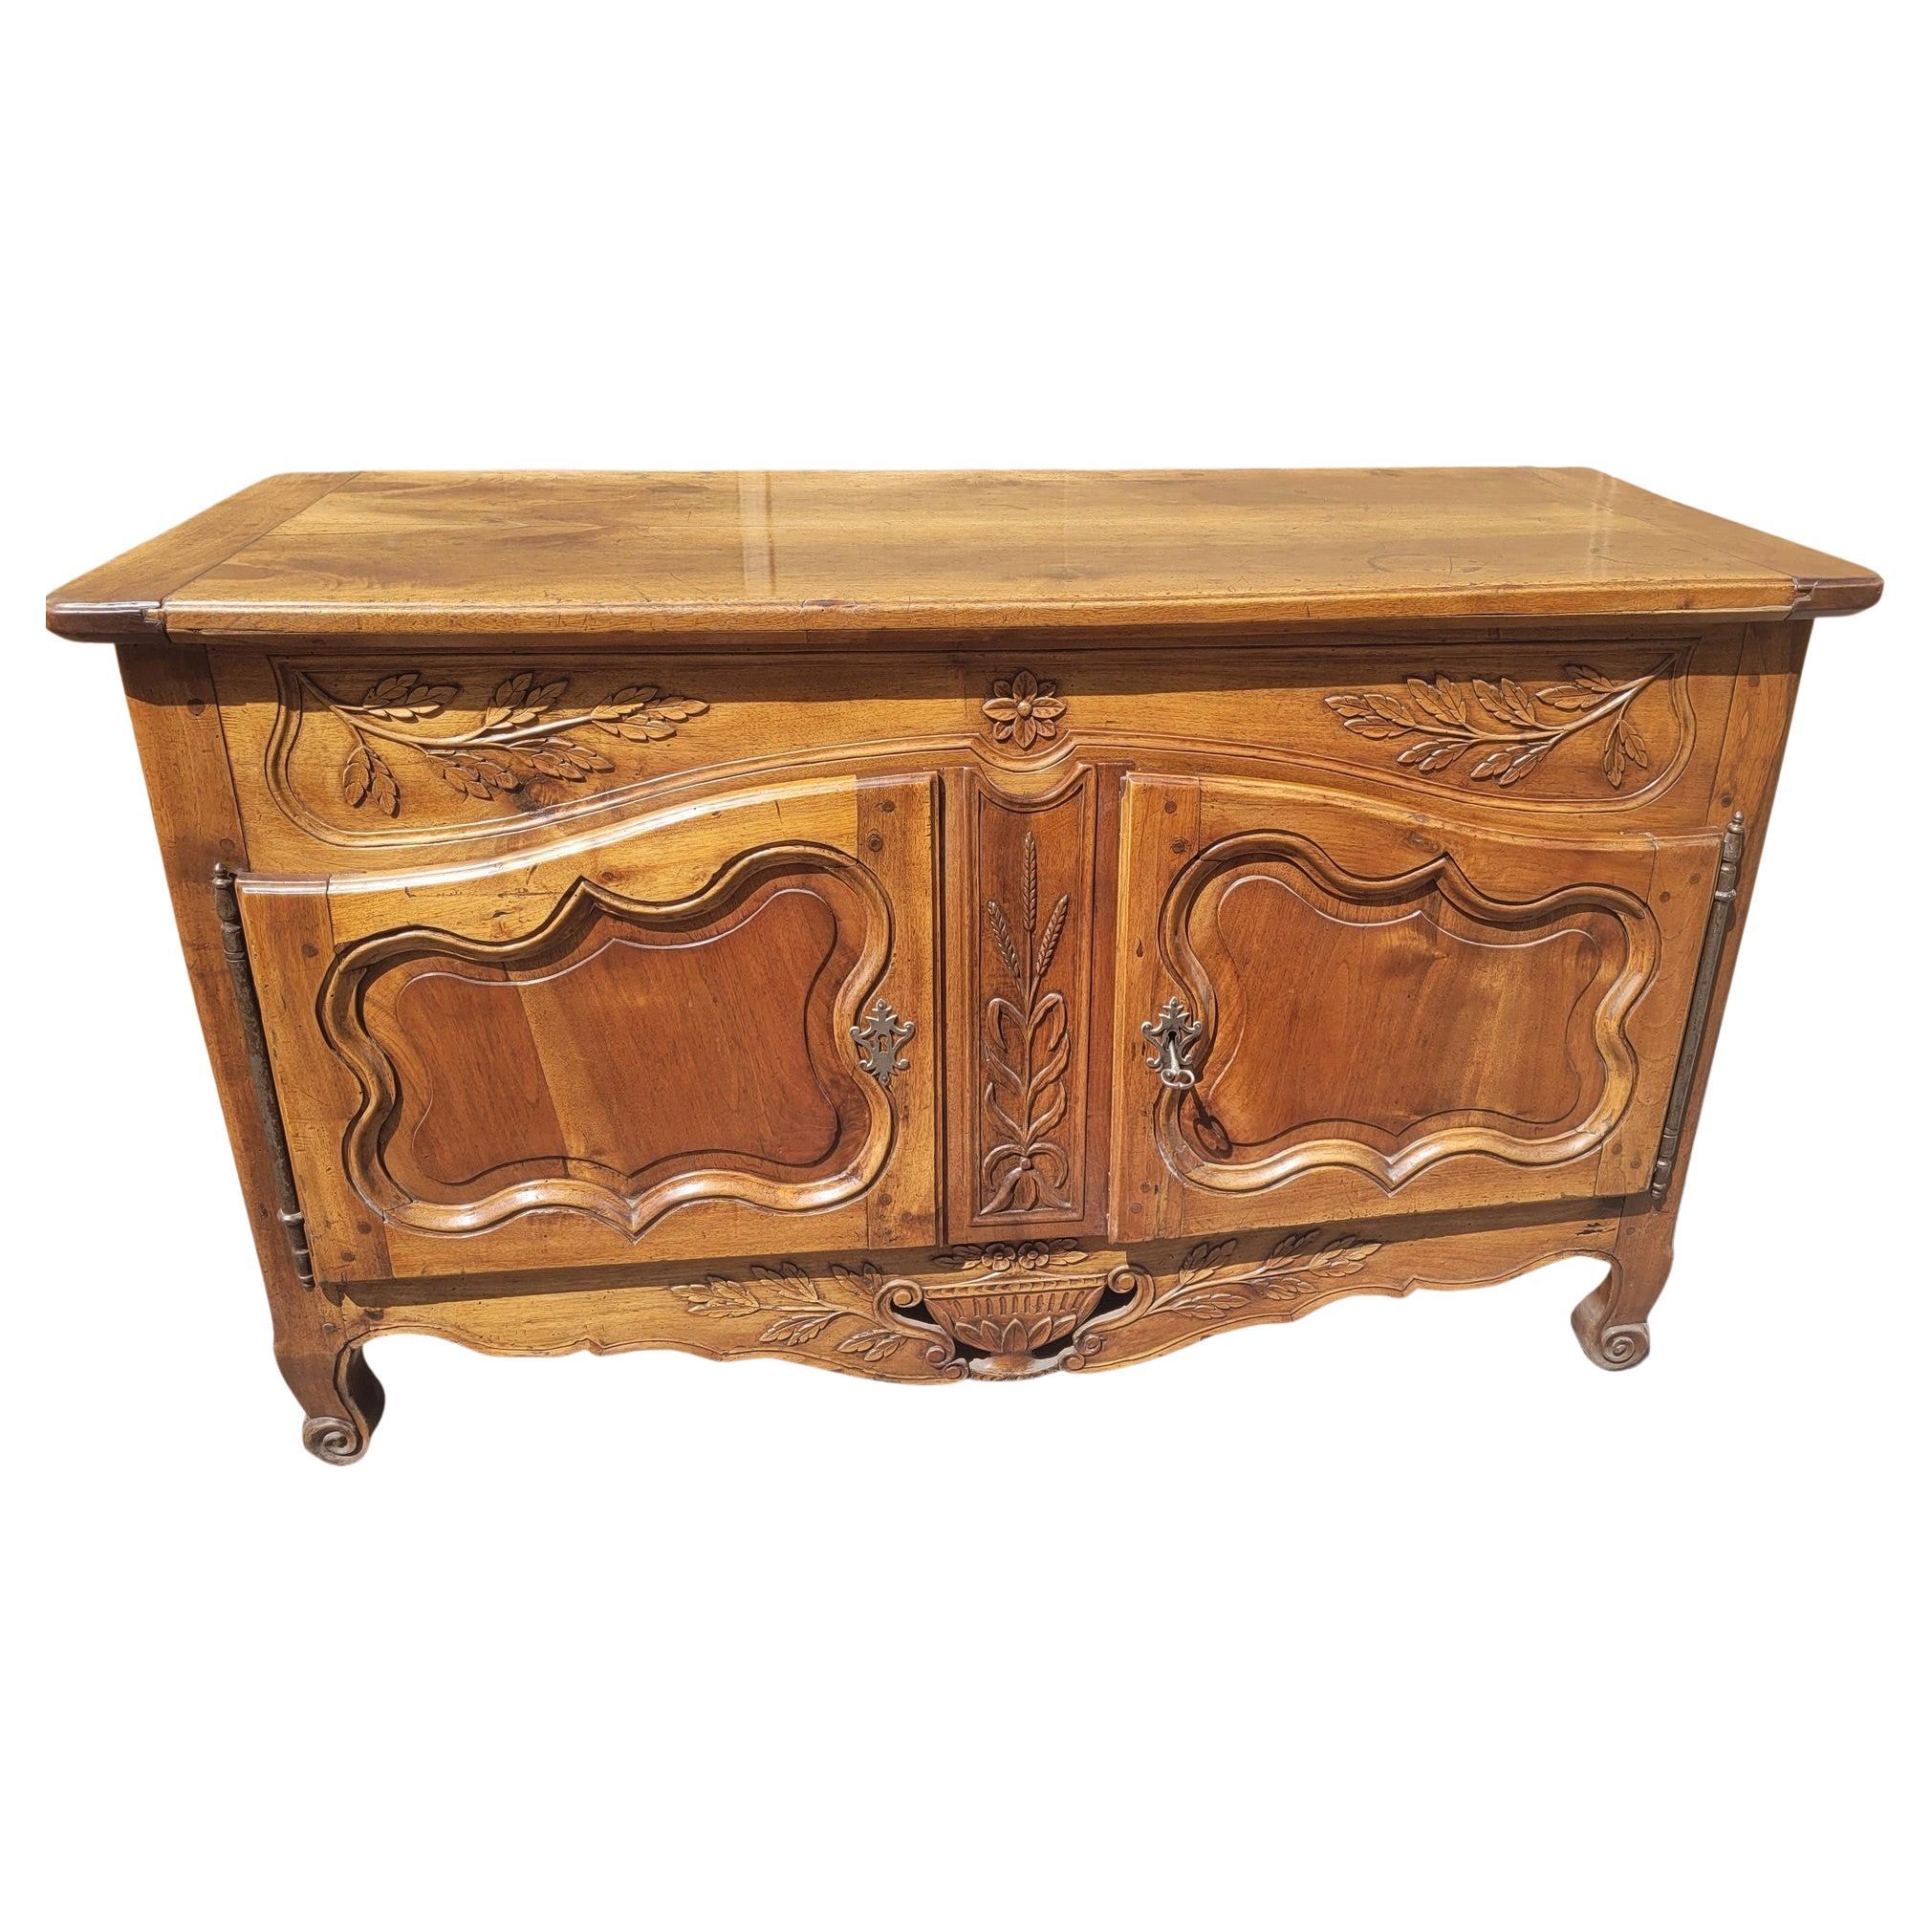 Provençal Buffet "pétrin" Carved Walnut, Early 19th Century For Sale